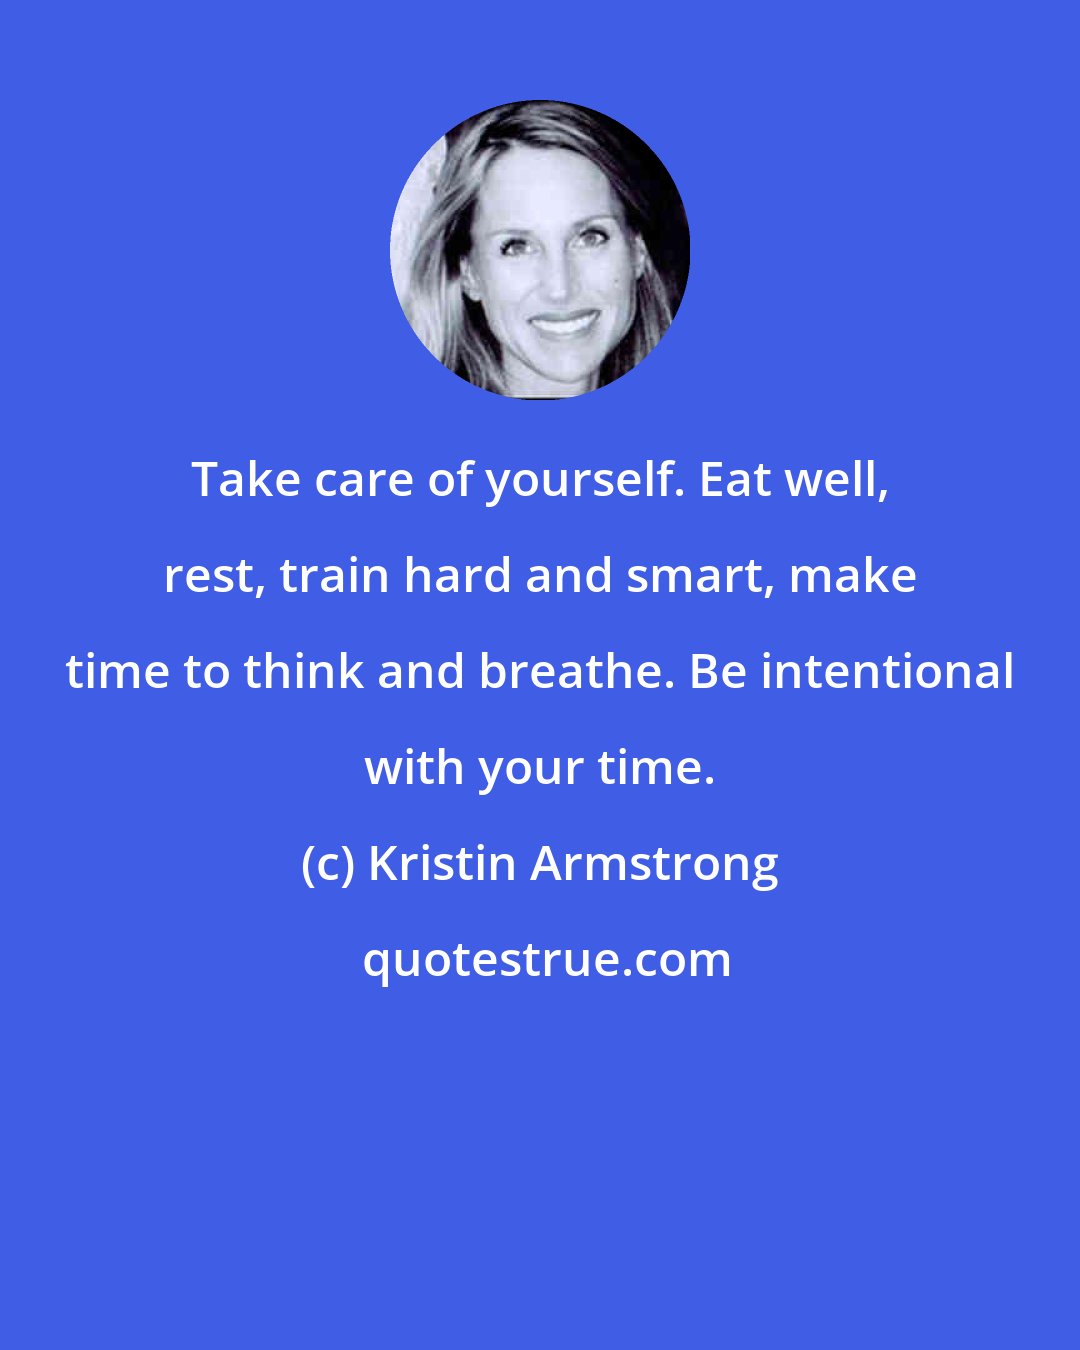 Kristin Armstrong: Take care of yourself. Eat well, rest, train hard and smart, make time to think and breathe. Be intentional with your time.